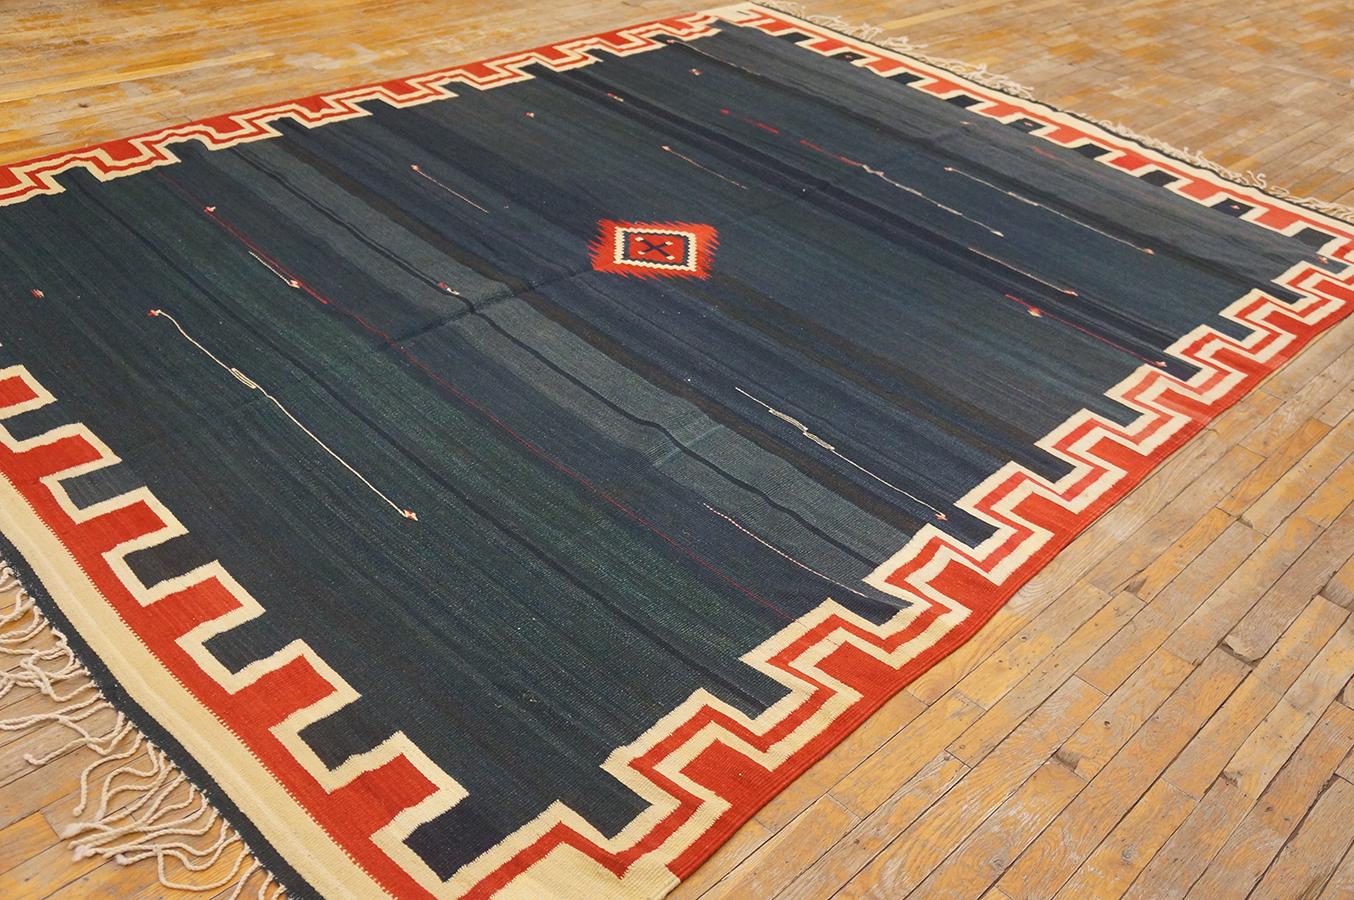 This shared-warp, flat tapestry woven piece is extremely rare both for its large size and for its much abrashed rich dark blue ground highlighted by streaking white “shooting stars”. The small central red. Ivory and black diamond is tonally matched